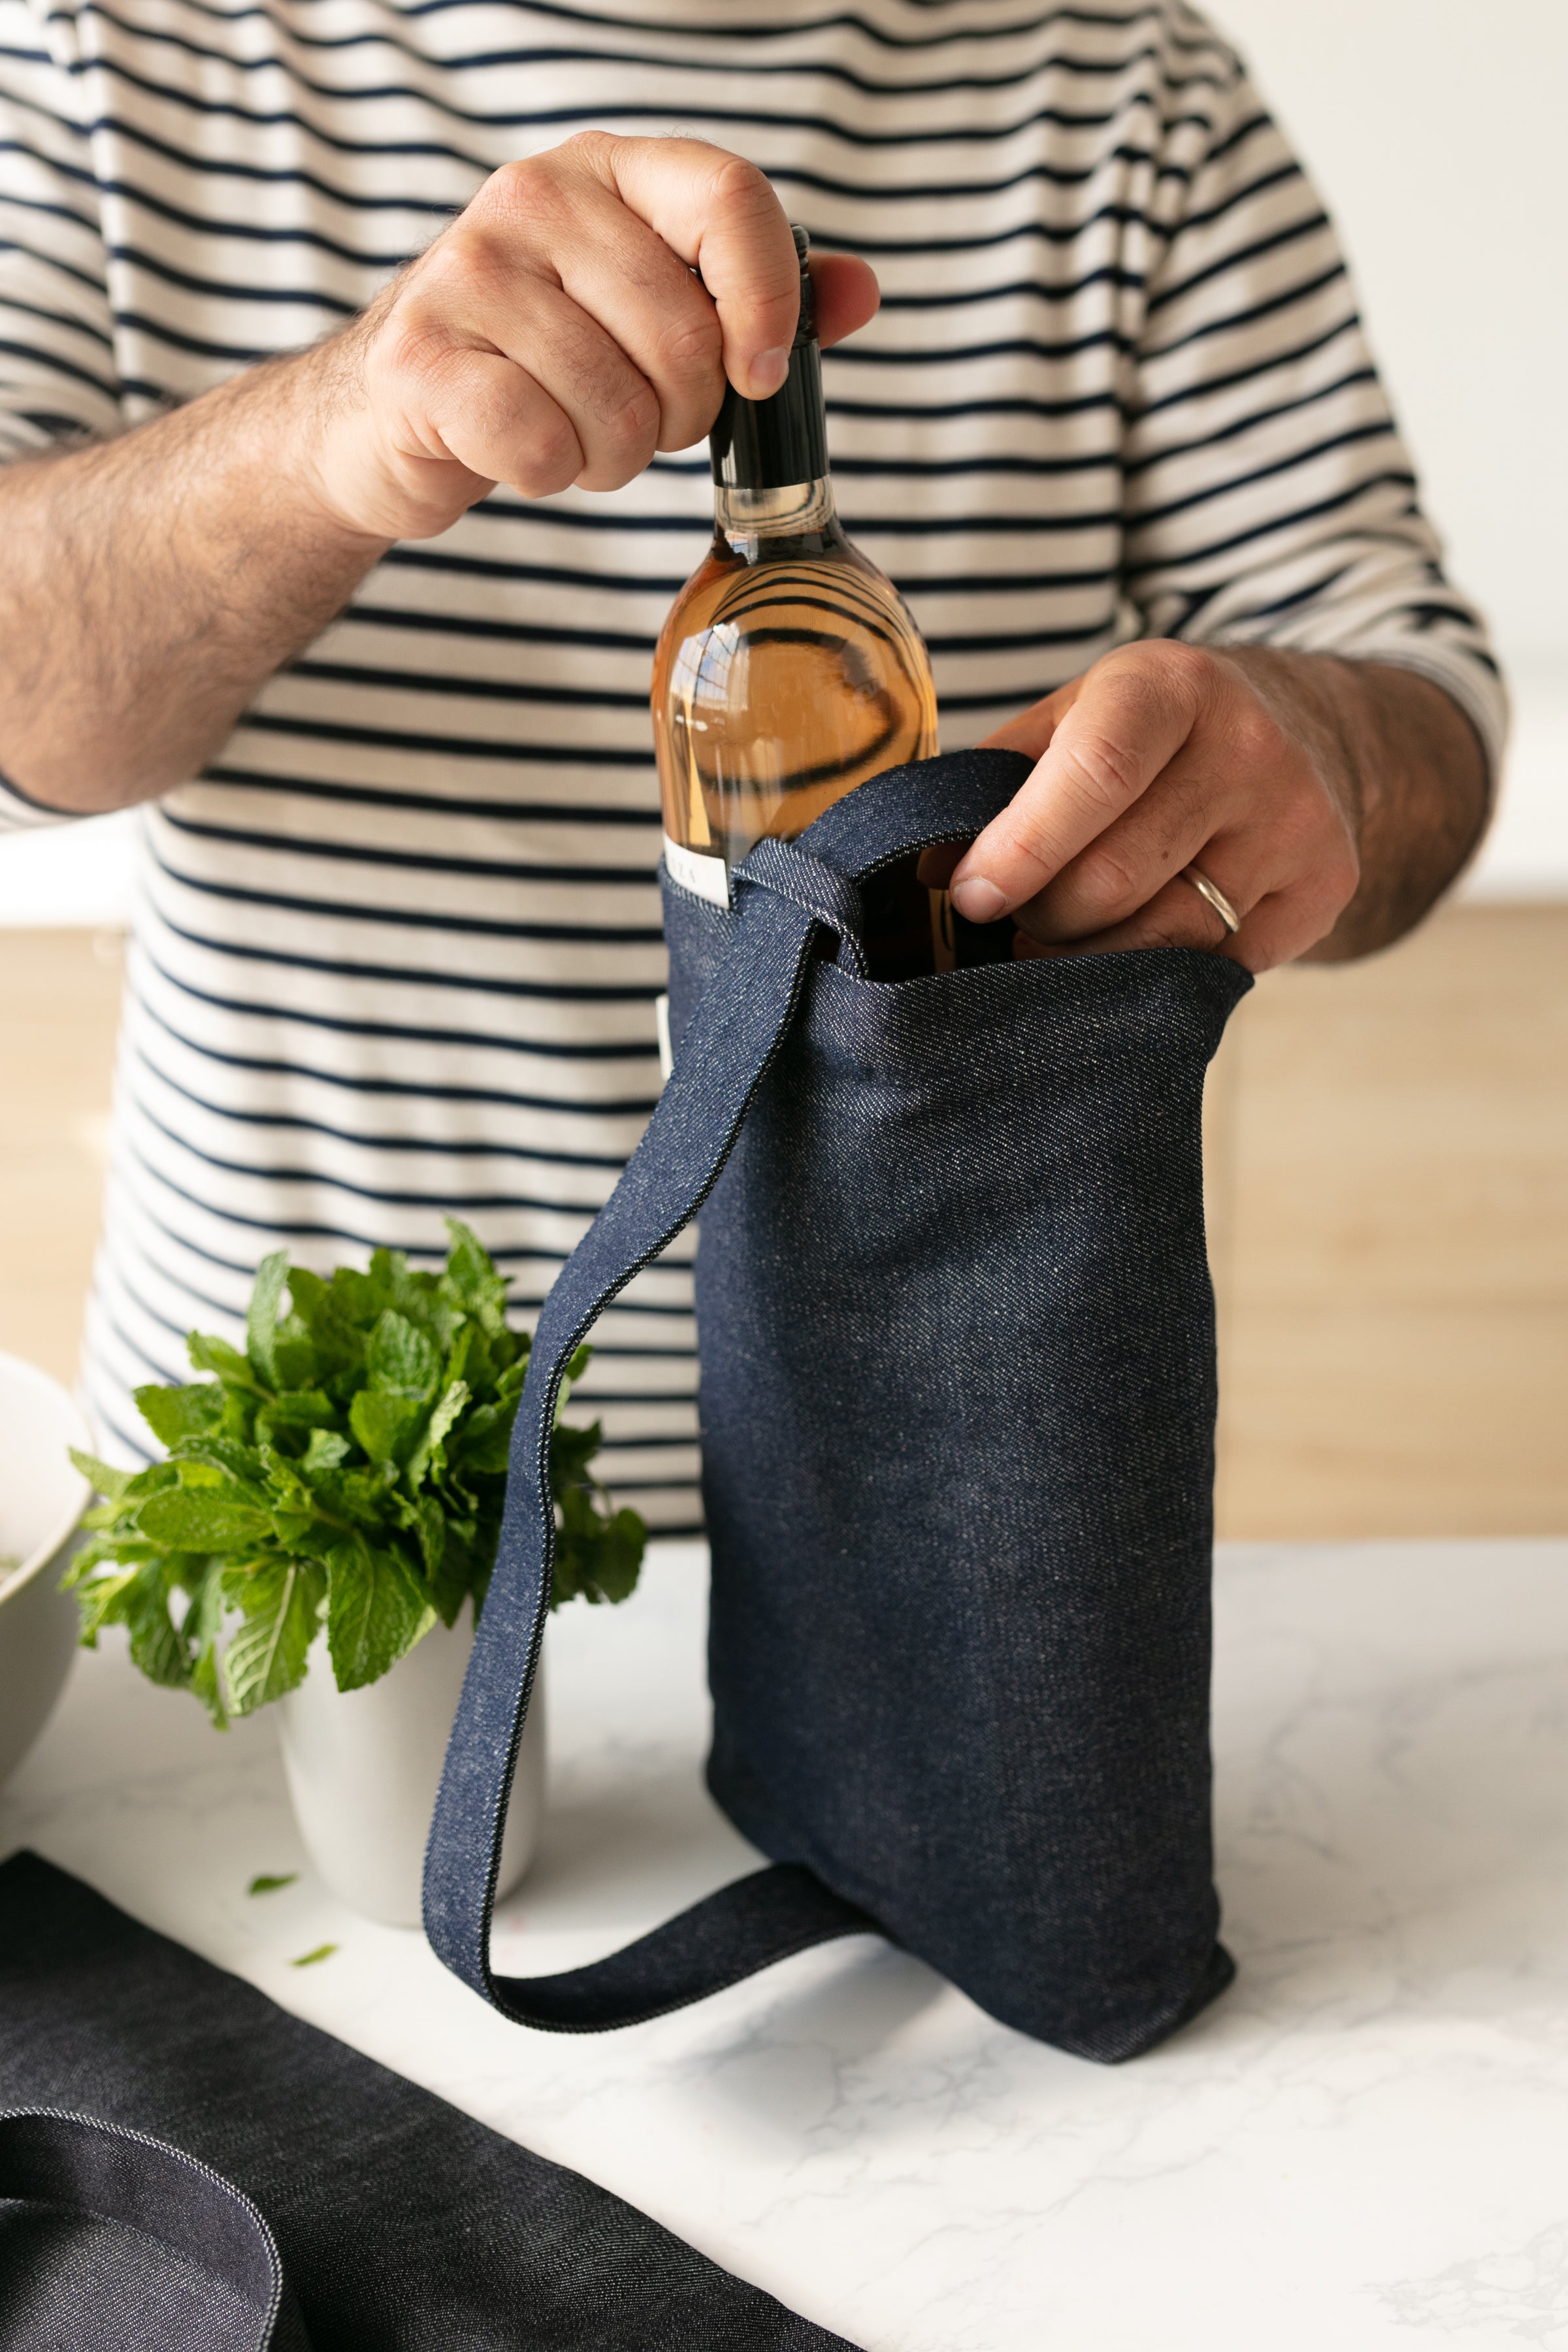 The Best Wine Purses For 2022 [Trendy & Fun!]